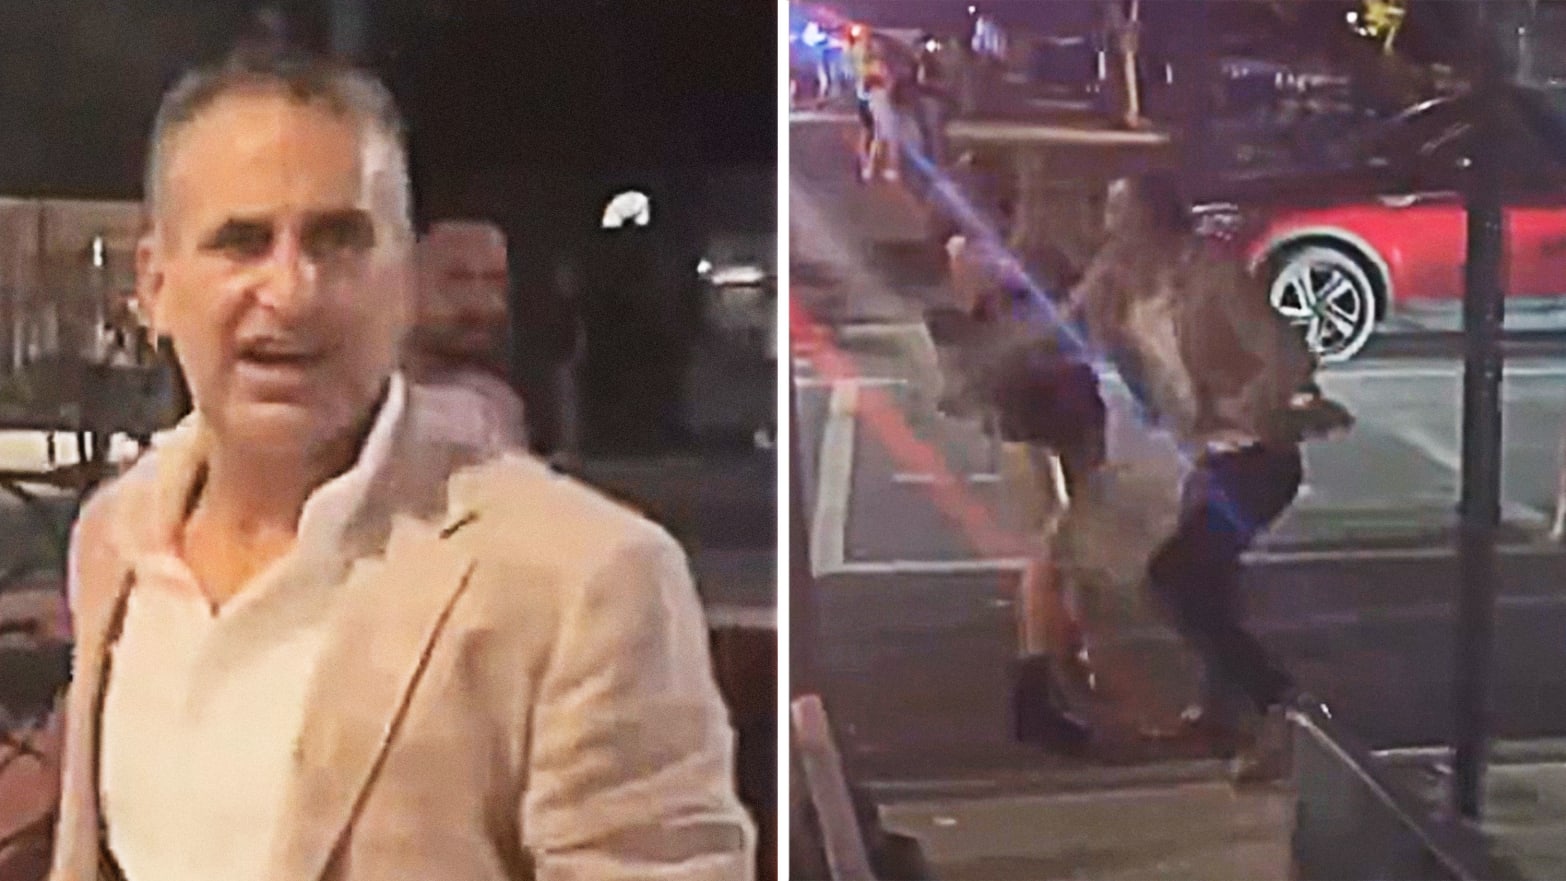 Jonathan Kaye, who served as a managing director at publicly traded investment bank Moelis & Company, was filmed punching a woman in Brooklyn earlier this month. 